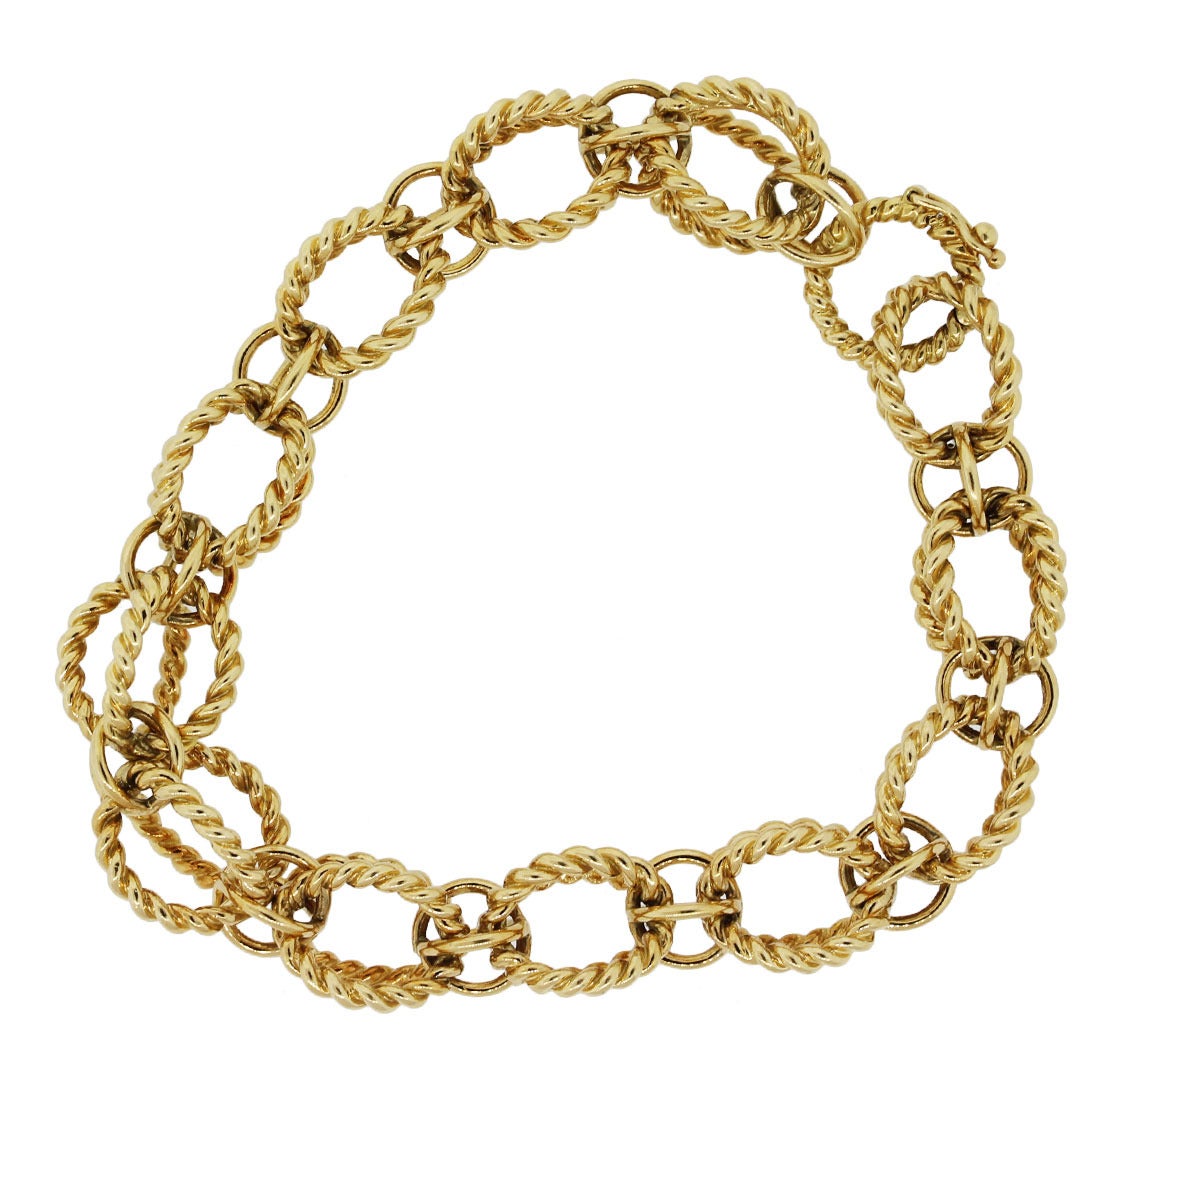 Tiffany and Co. Schlumberger Gold Rope Link Bracelet at 1stdibs